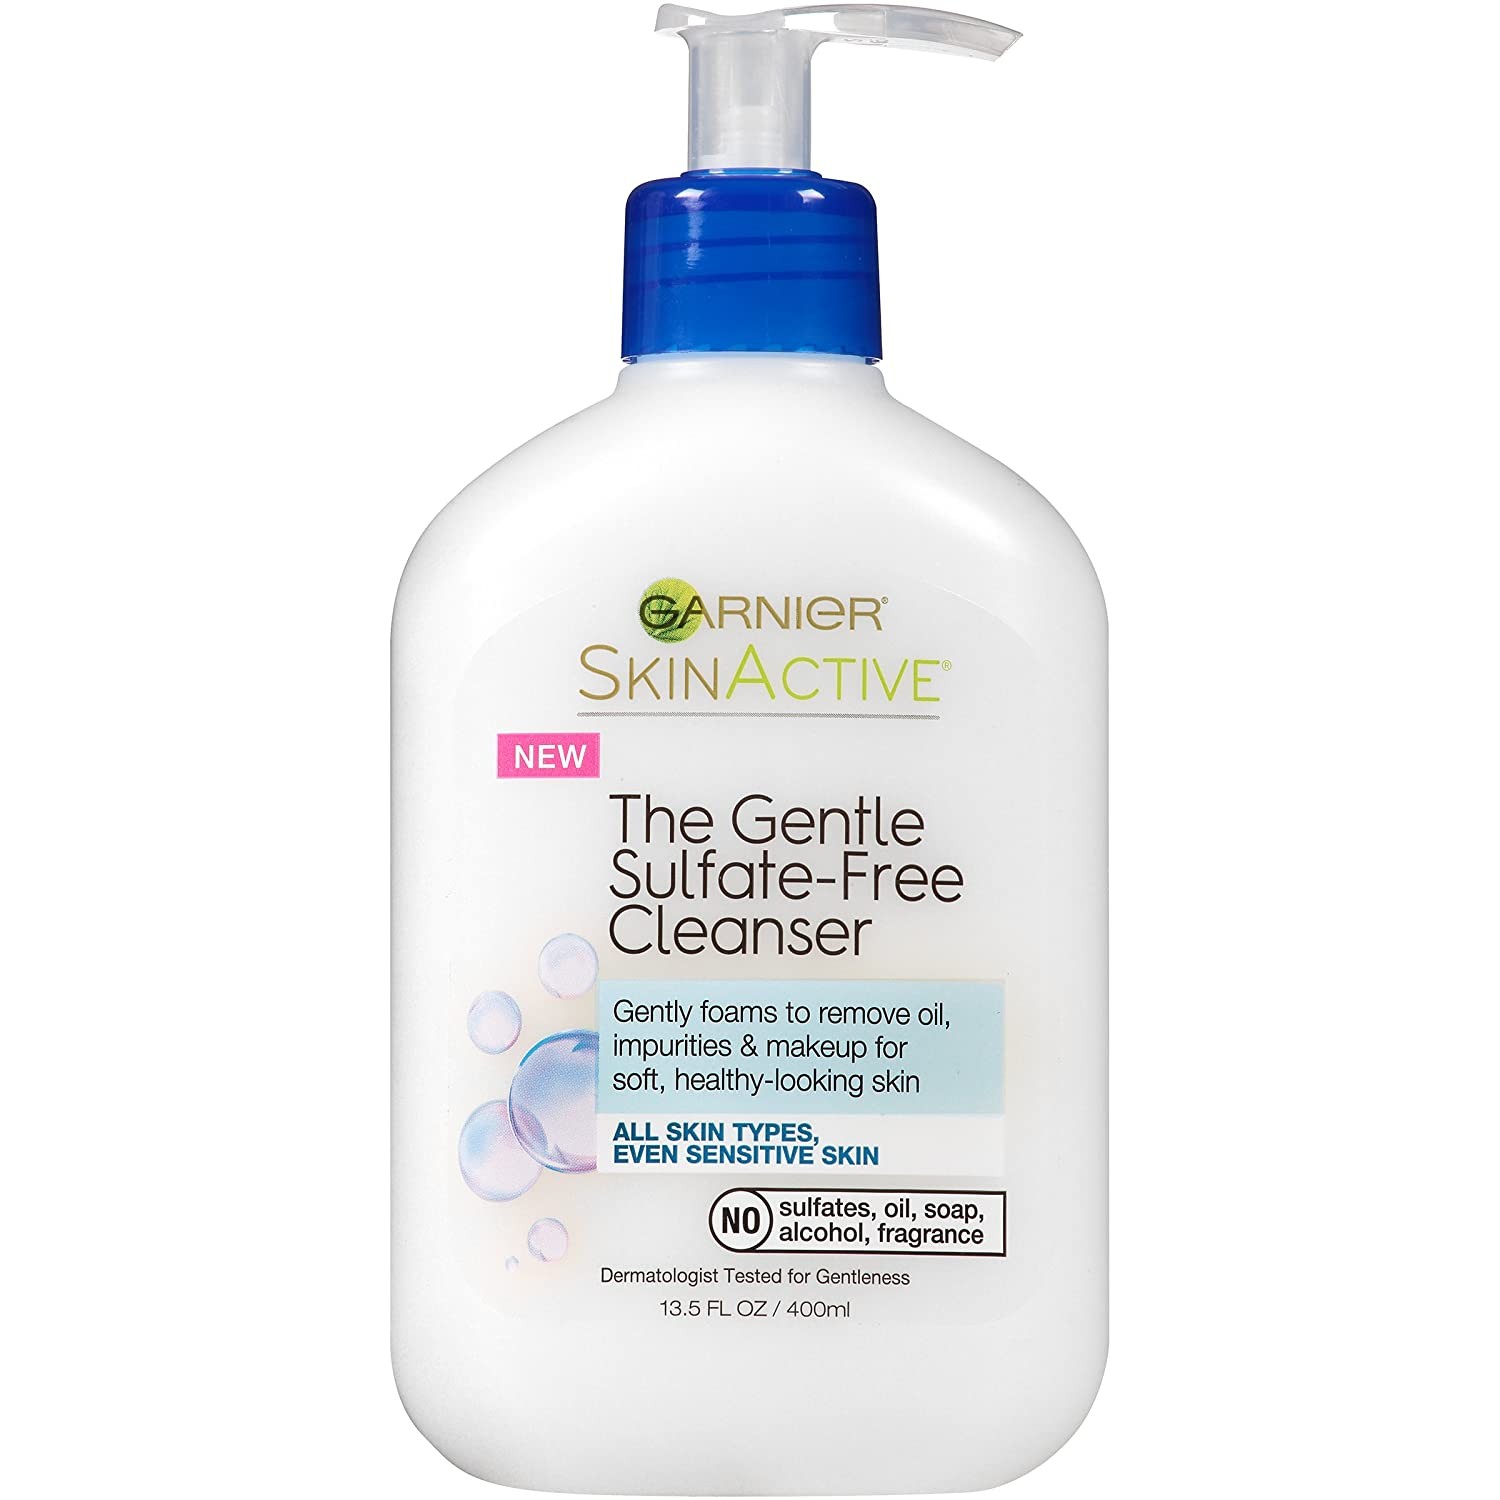 Garnier SkinActive The Gentle Sulfate-Free Cleanser, 13.5 Fluid Ounce